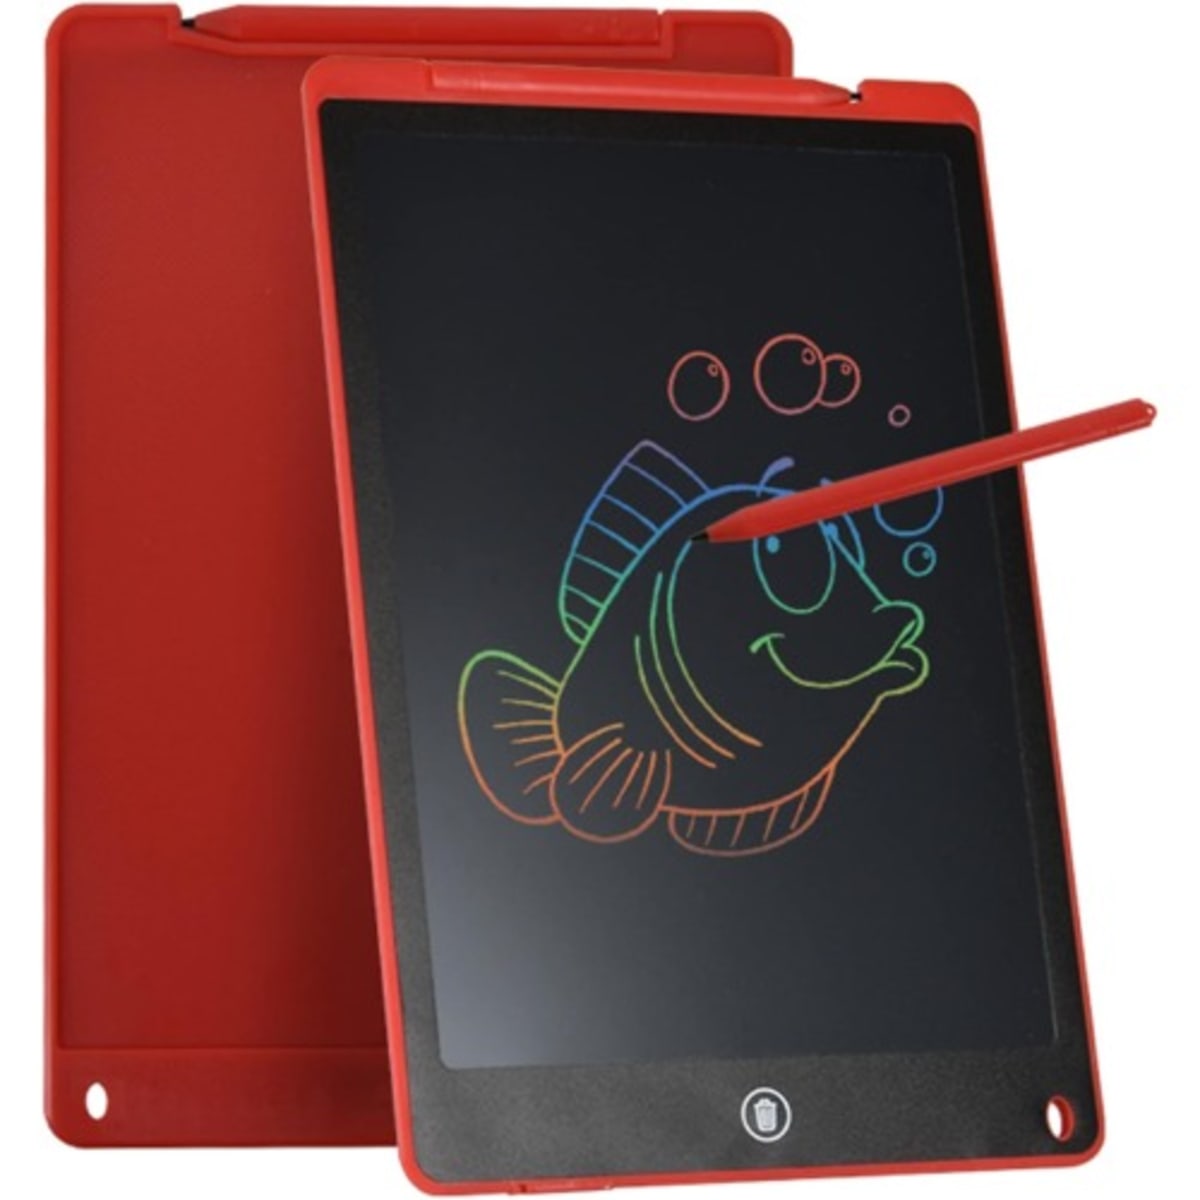 Drawing Pad for Kids - Tablets 12 inch